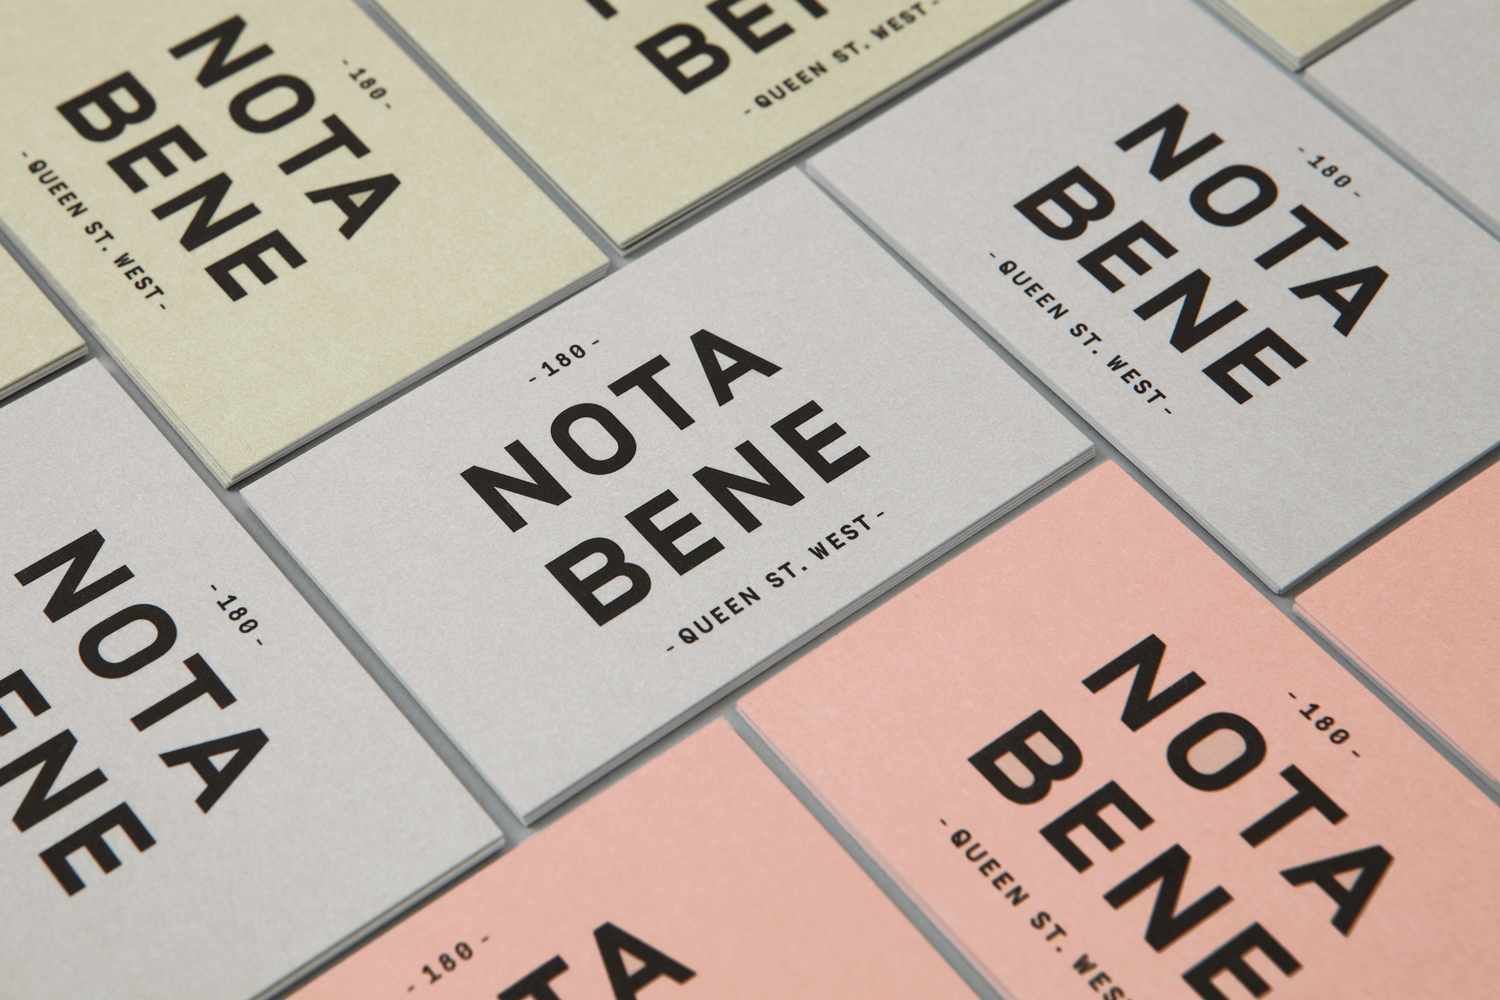 Brand identity and business cards for Toronto restaurant Nota Bene by graphic design studio Blok, Canada